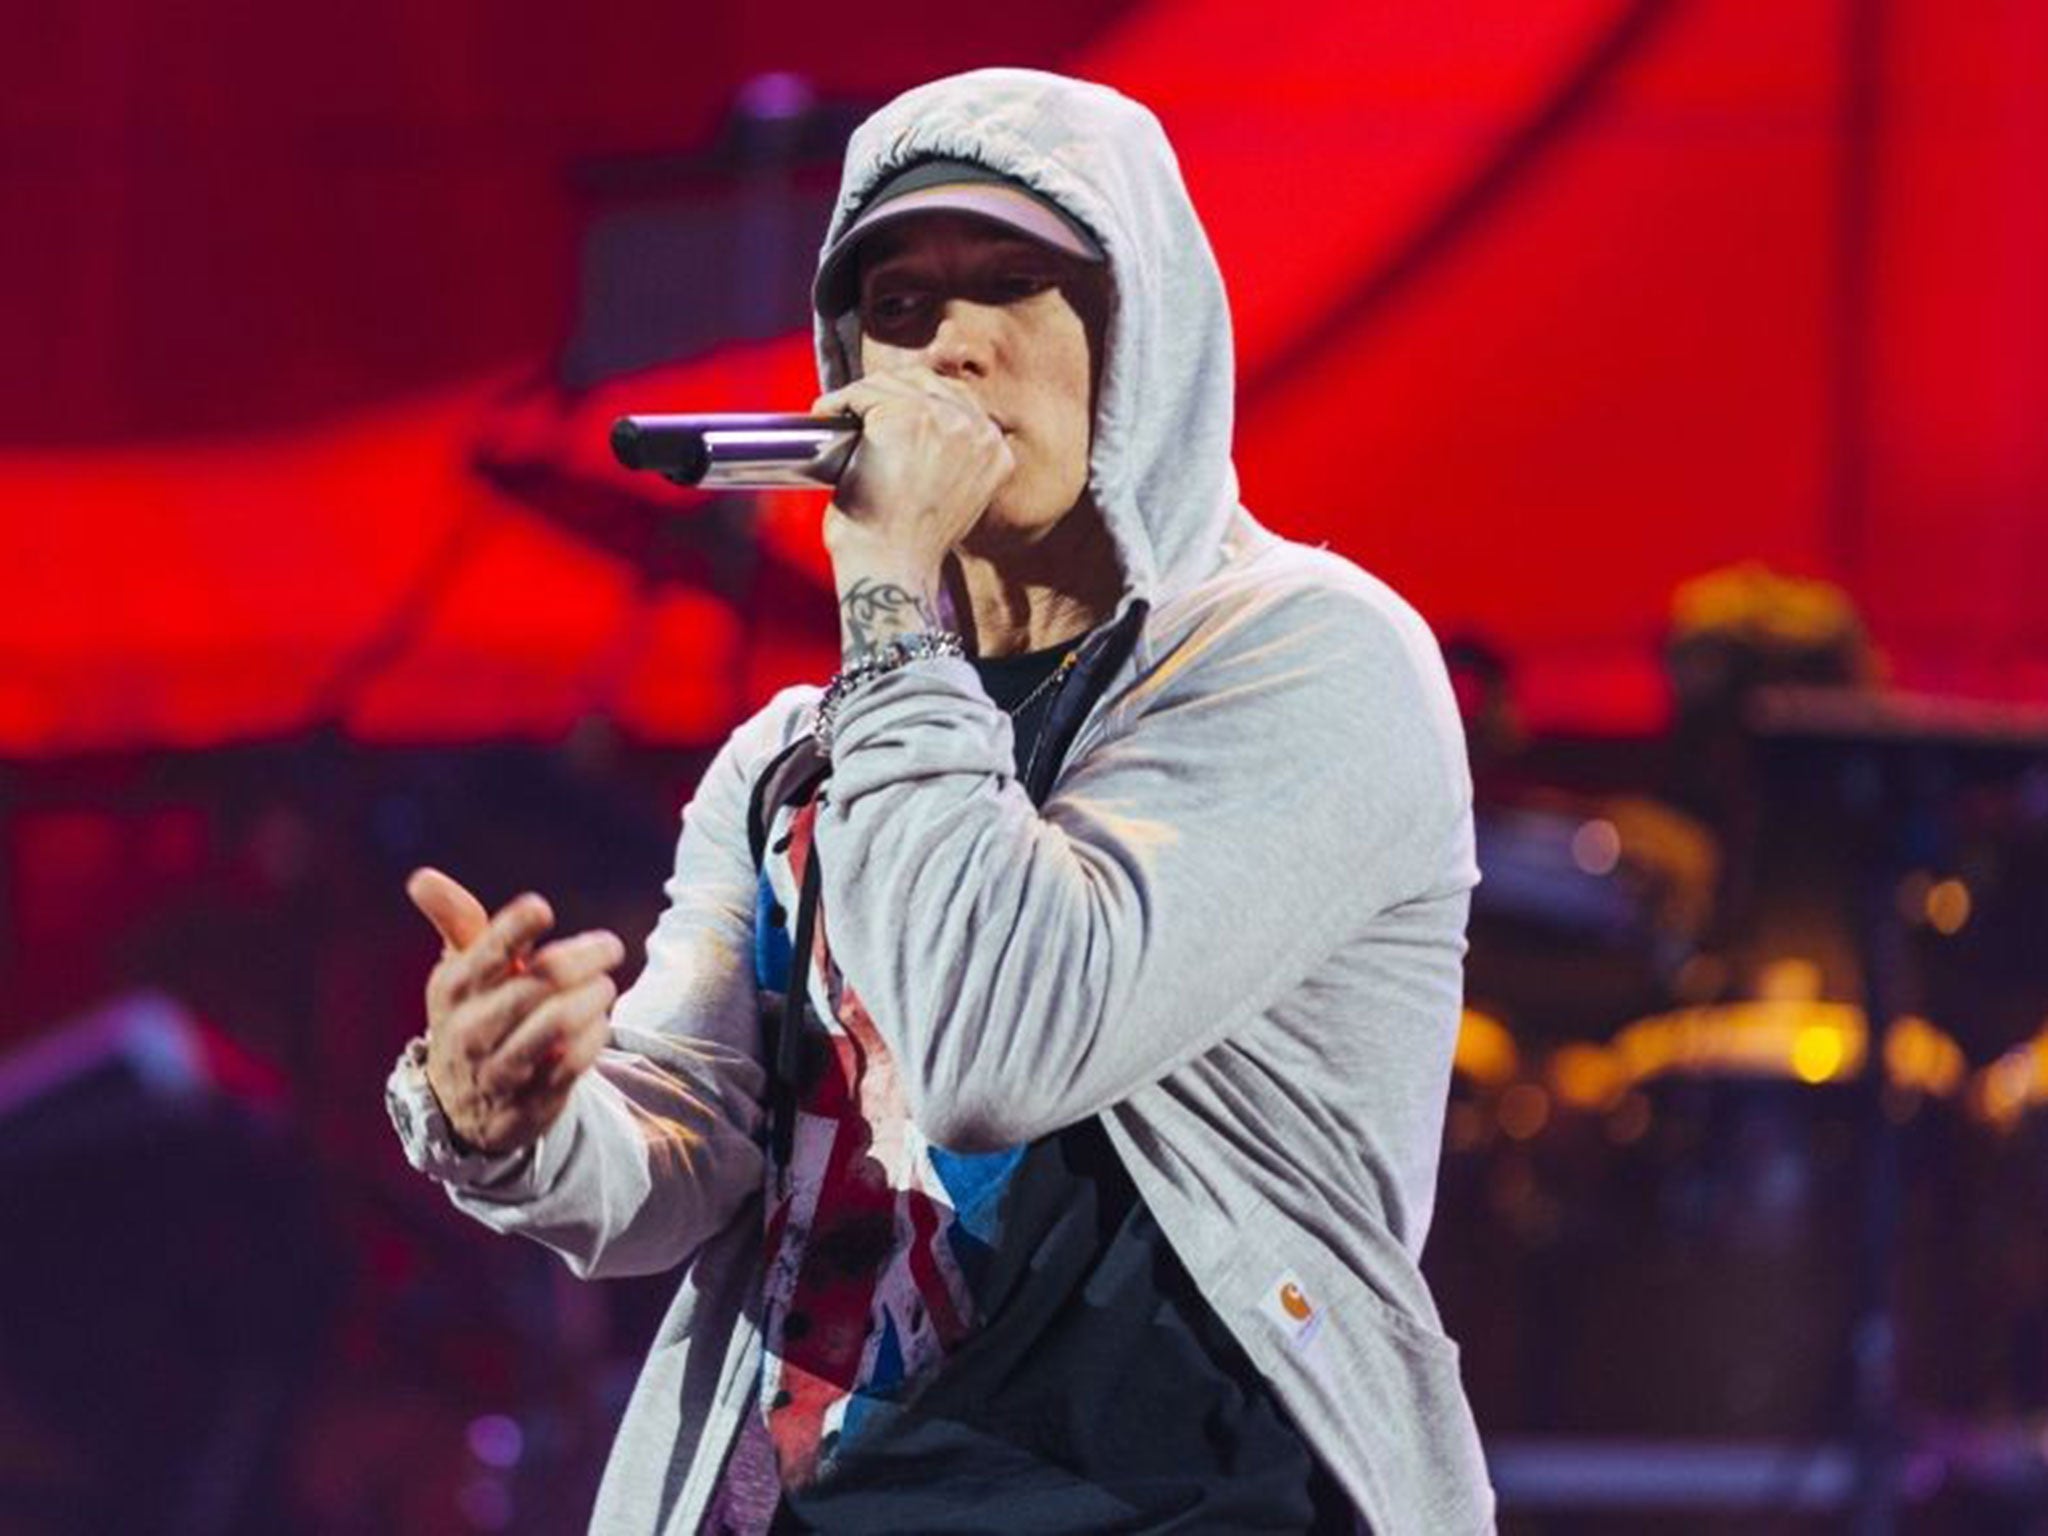 Eminem has threatened to punch Lana Del Rey in a new cypher